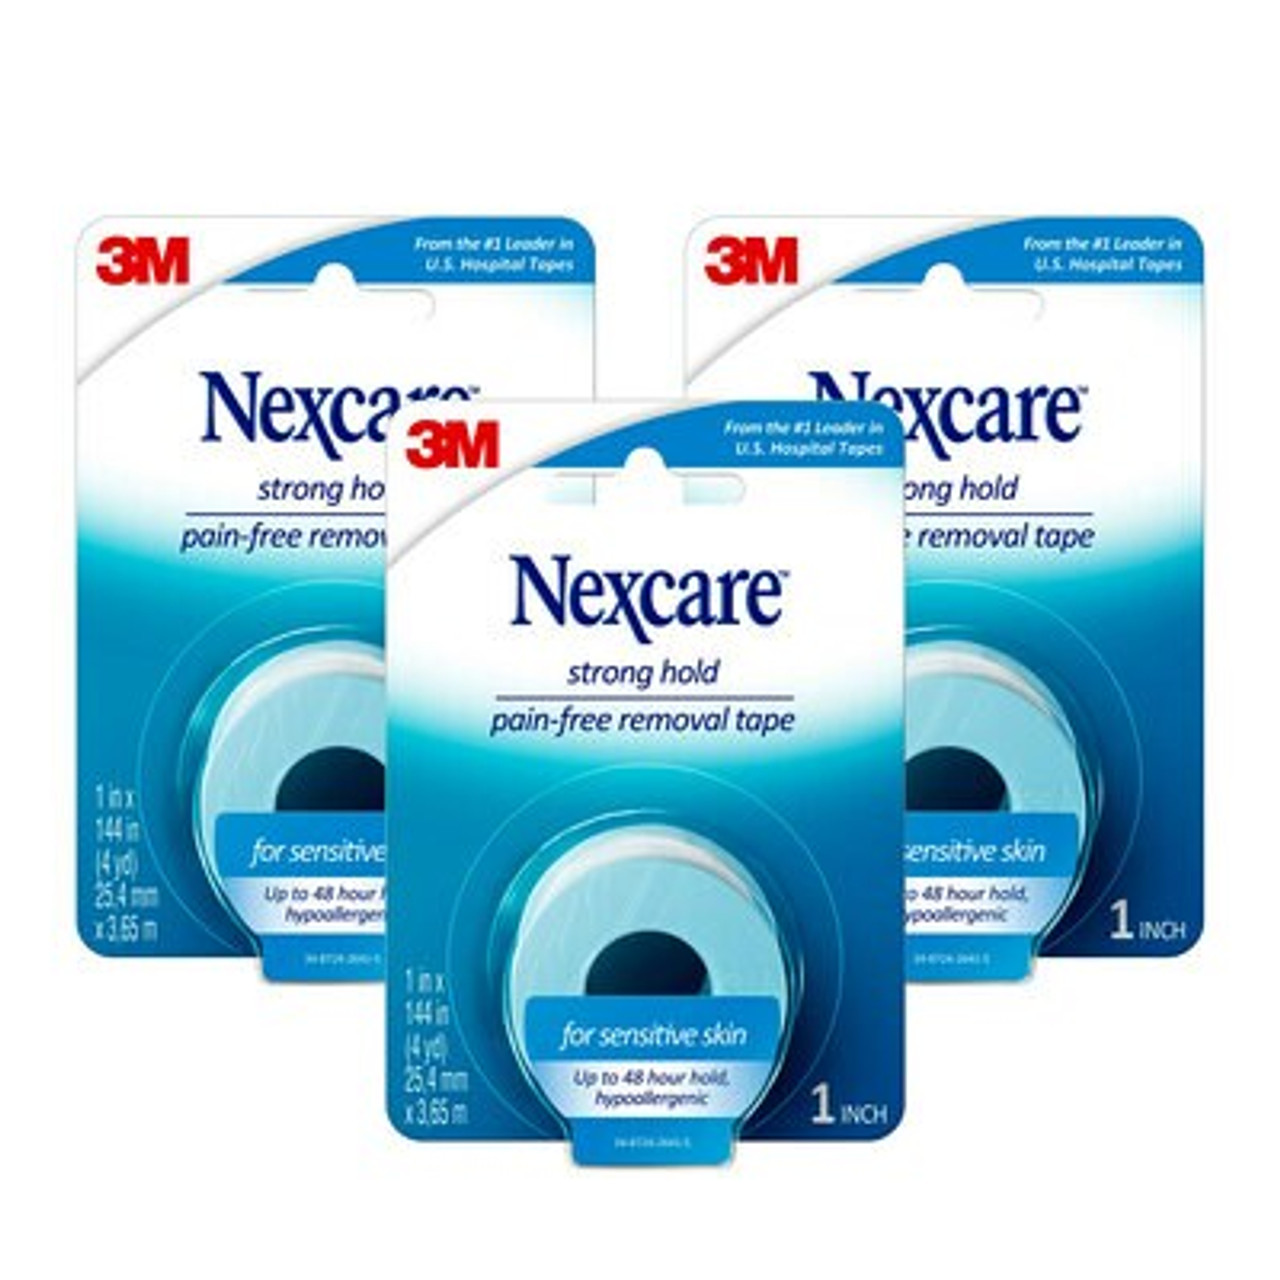 Nexcare Gentle Paper Tape 1 in x 10 yd on Dispenser ( 3 pack